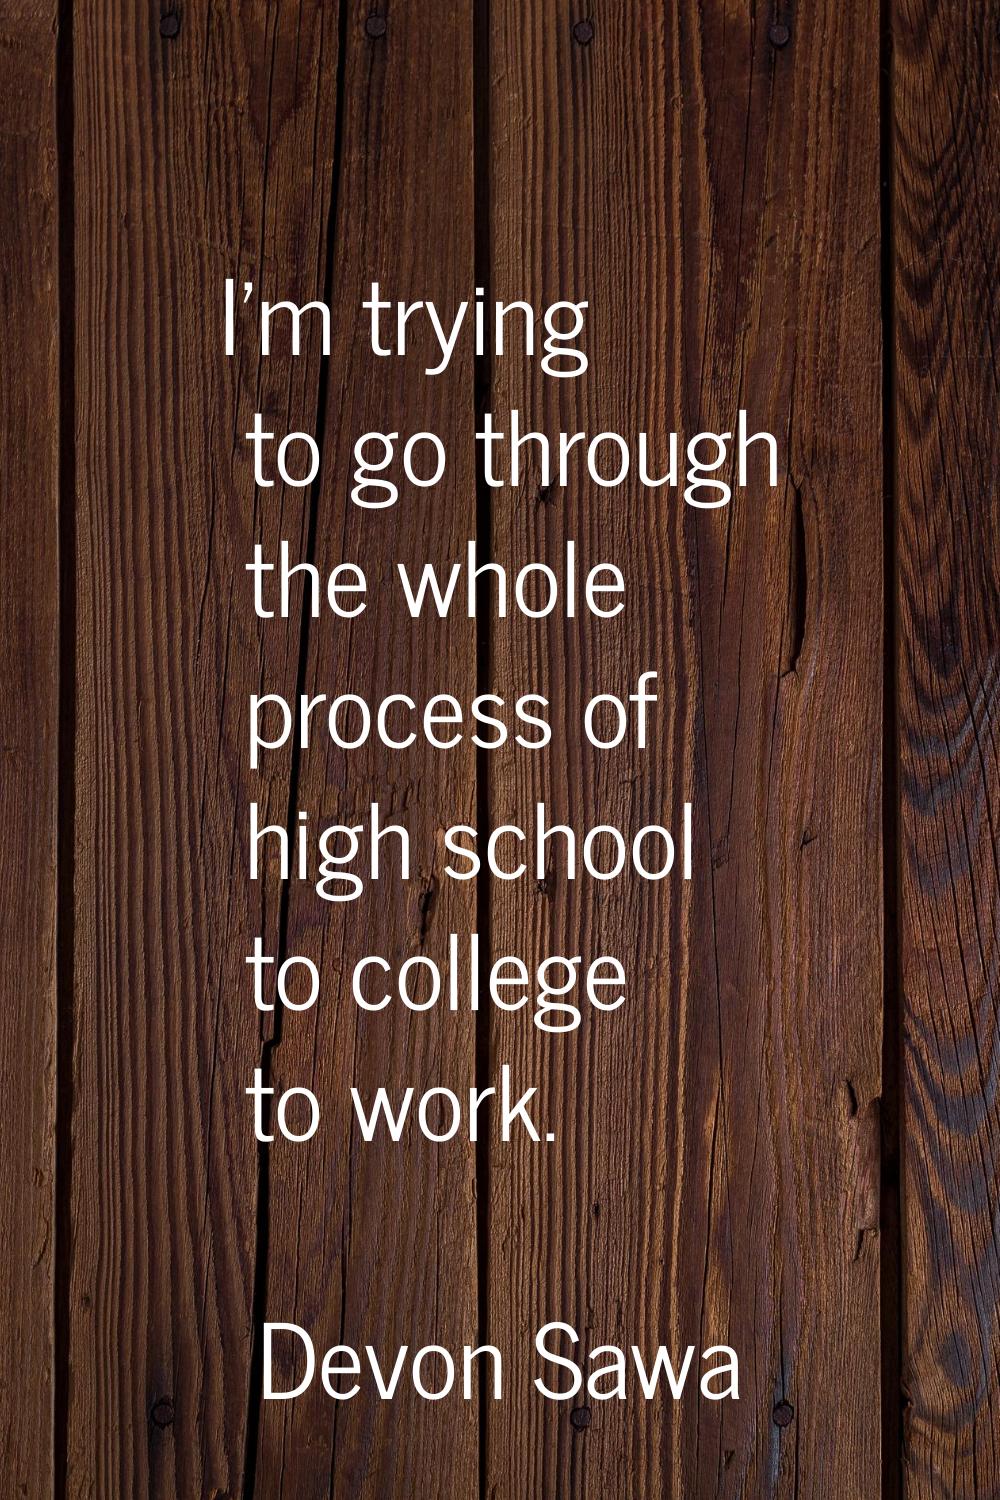 I'm trying to go through the whole process of high school to college to work.